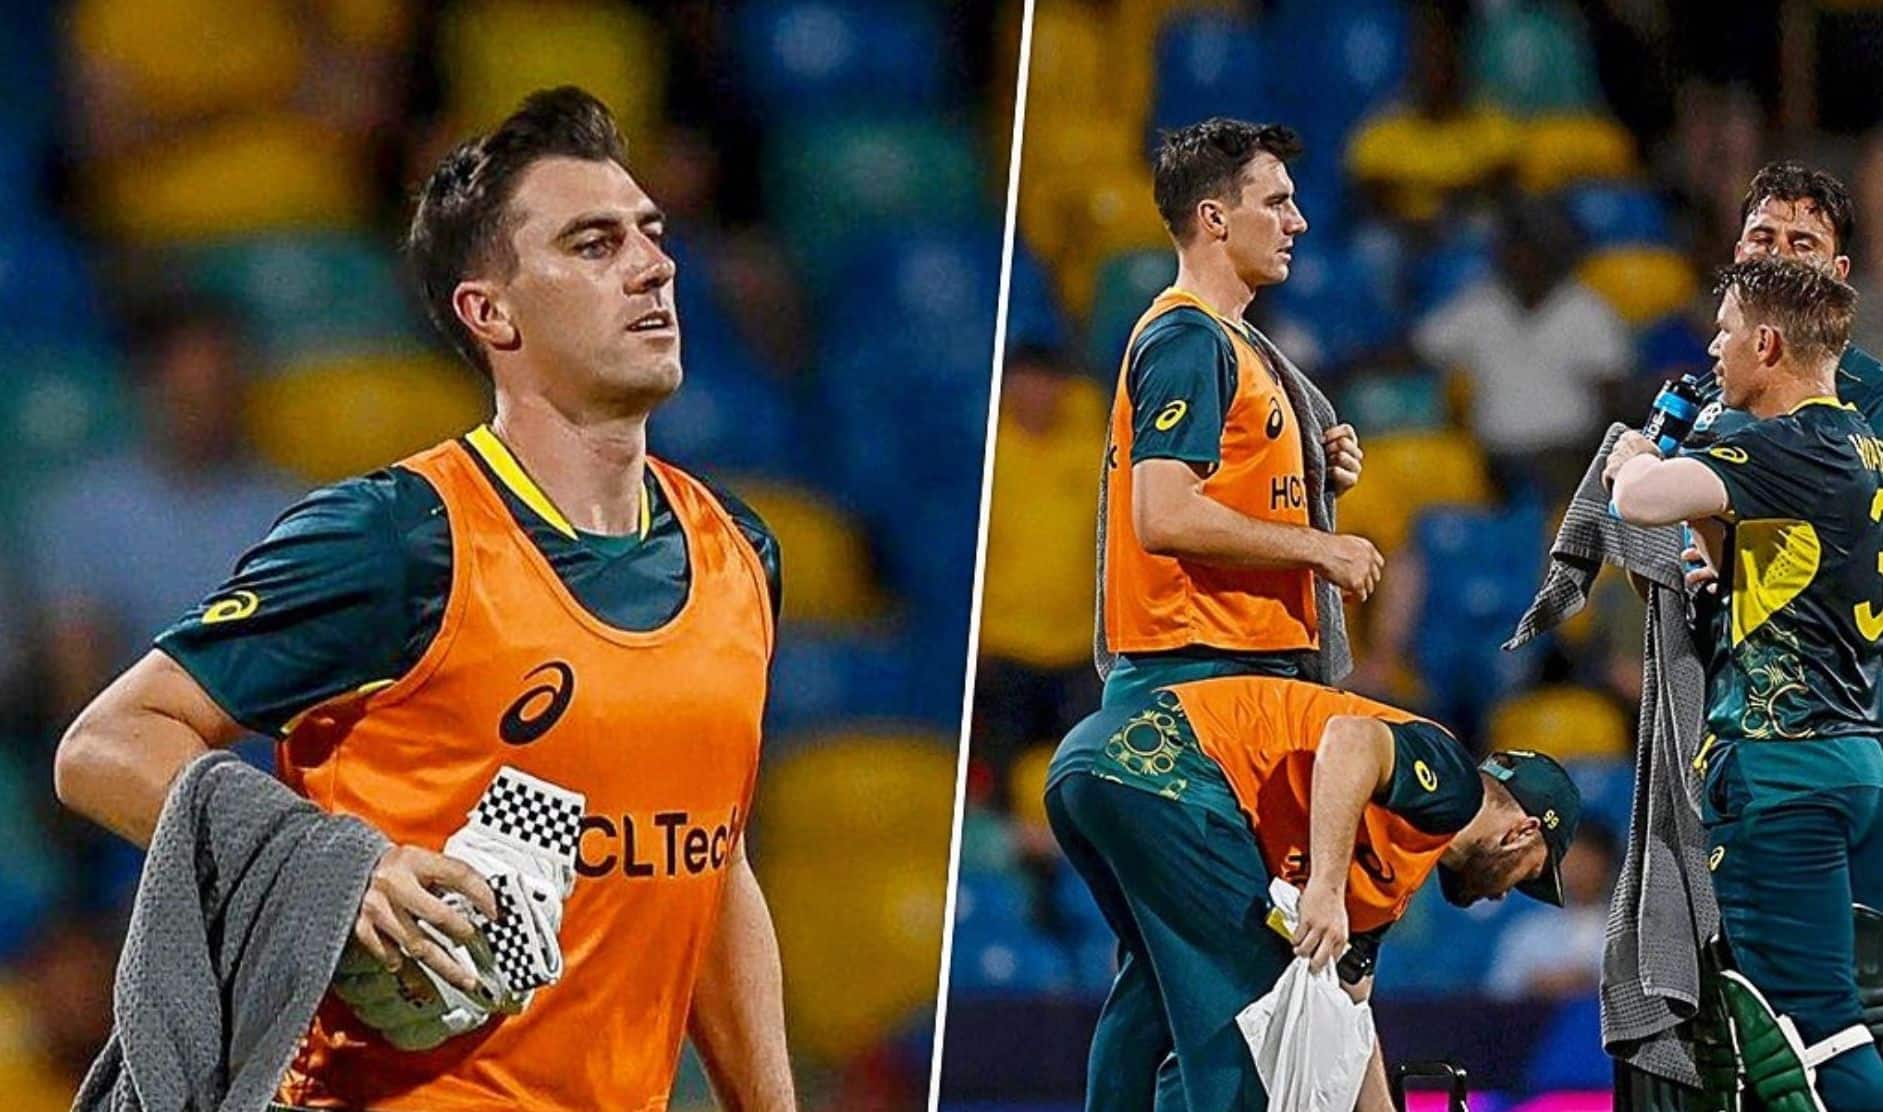 From WTC And ODI WC Winner To Water Boy, Check Pics Of Pat Cummins' New Avatar During AUS vs OMA